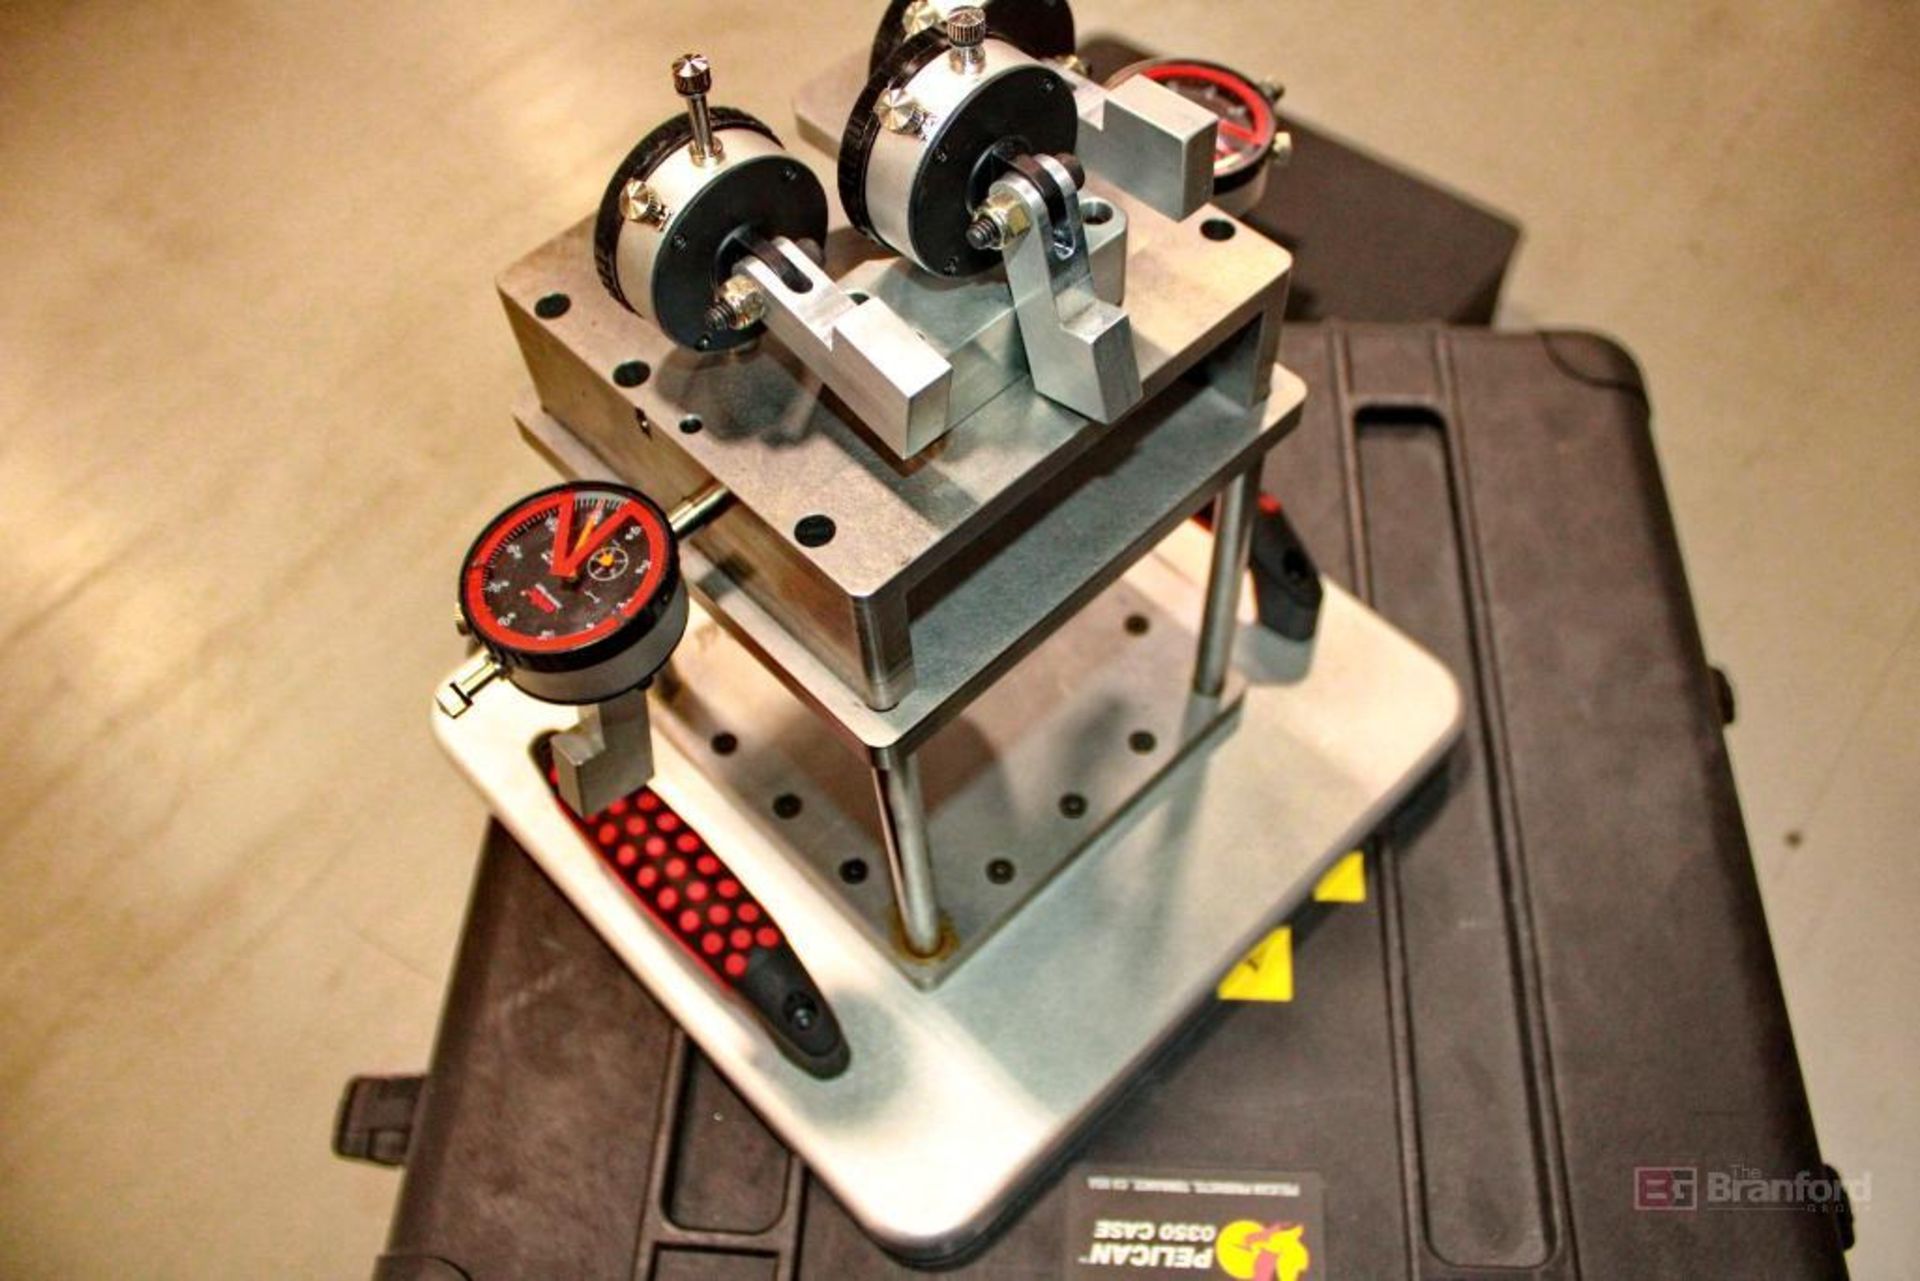 MHC Industrial Supply Laser Alignment Assembly Check Fixture w/ Pelican Case - Image 10 of 15